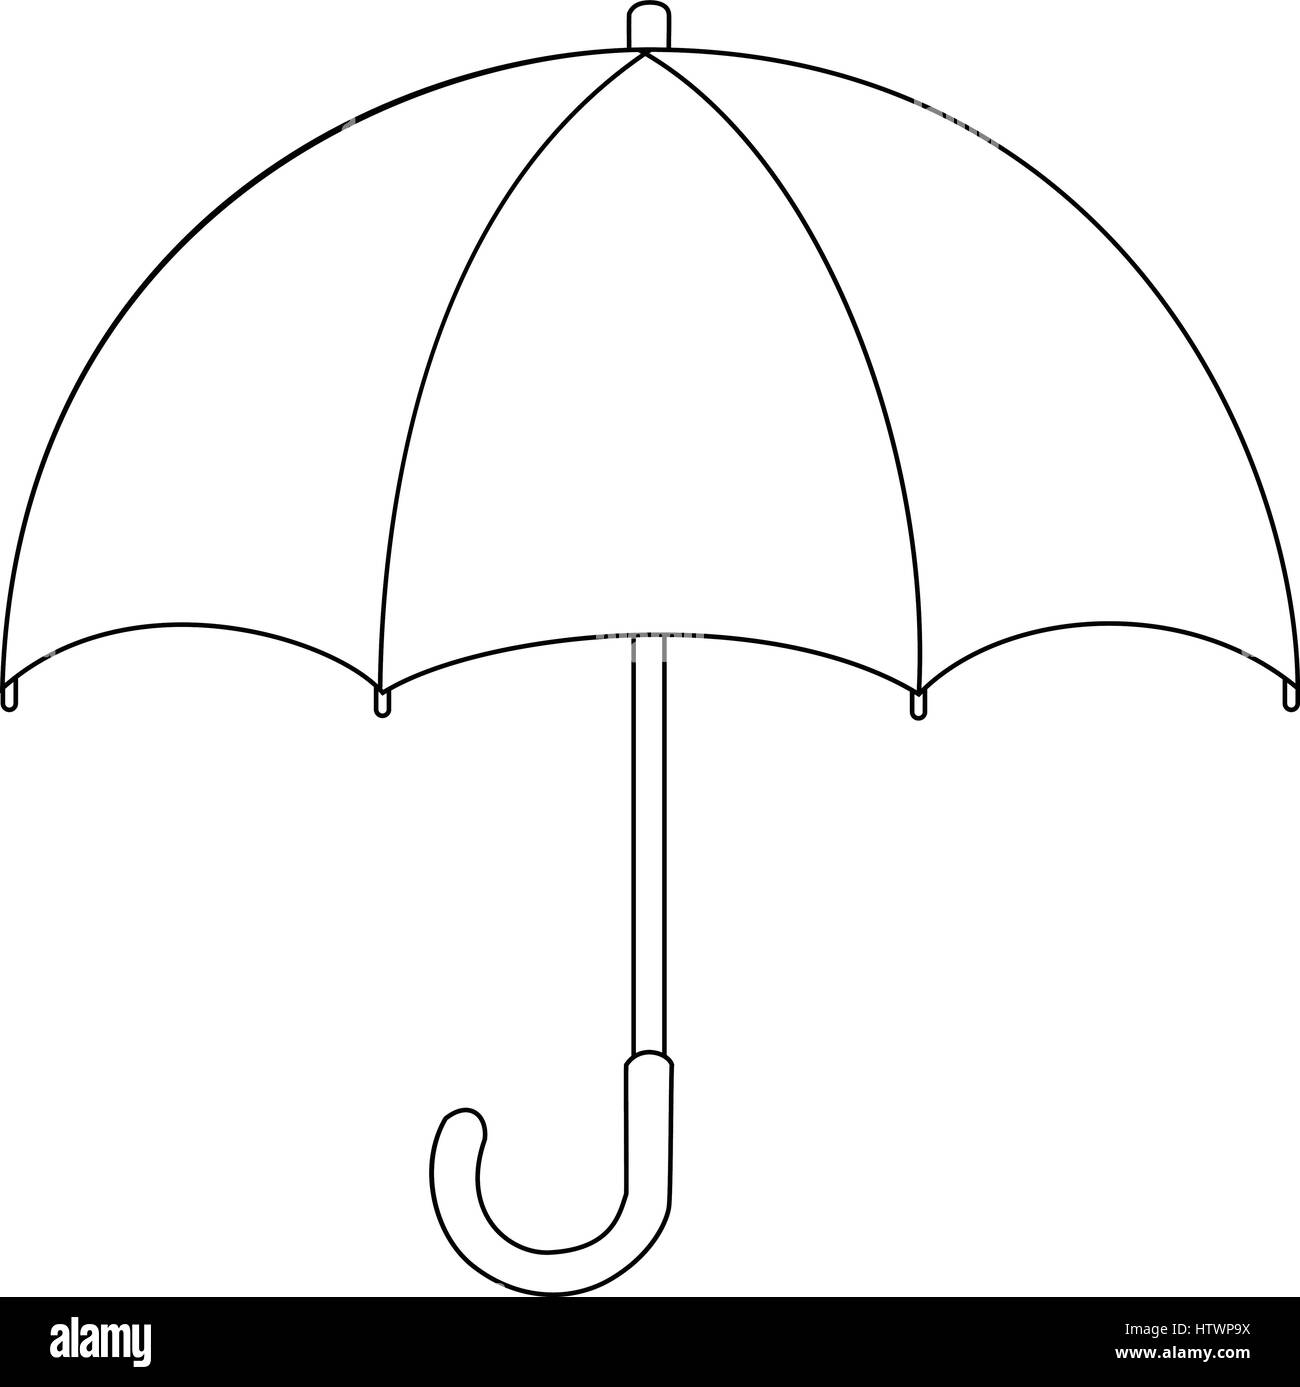 Umbrella Drawing  How To Draw An Umbrella Step By Step